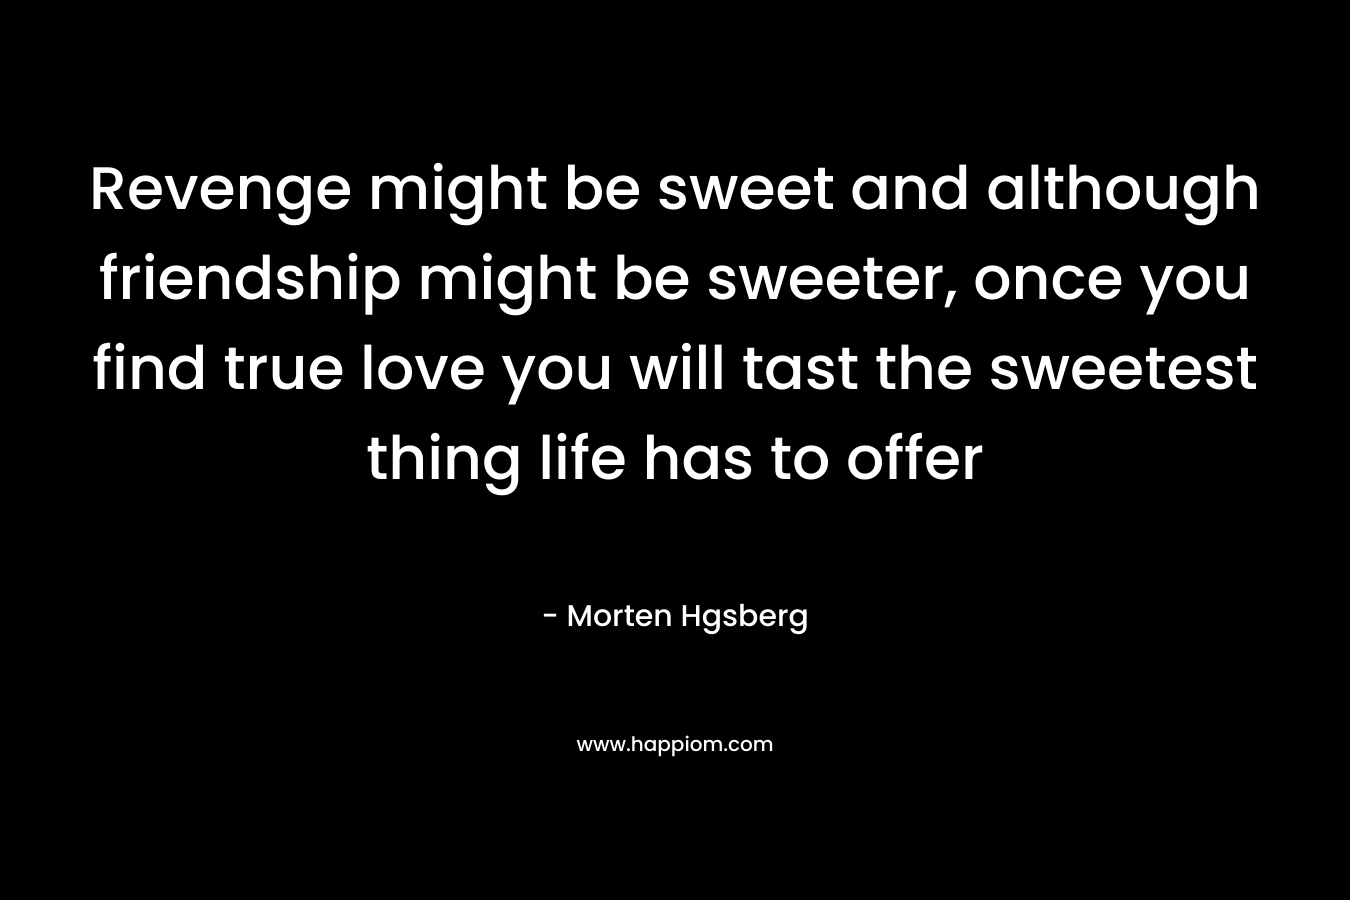 Revenge might be sweet and although friendship might be sweeter, once you find true love you will tast the sweetest thing life has to offer – Morten Hgsberg